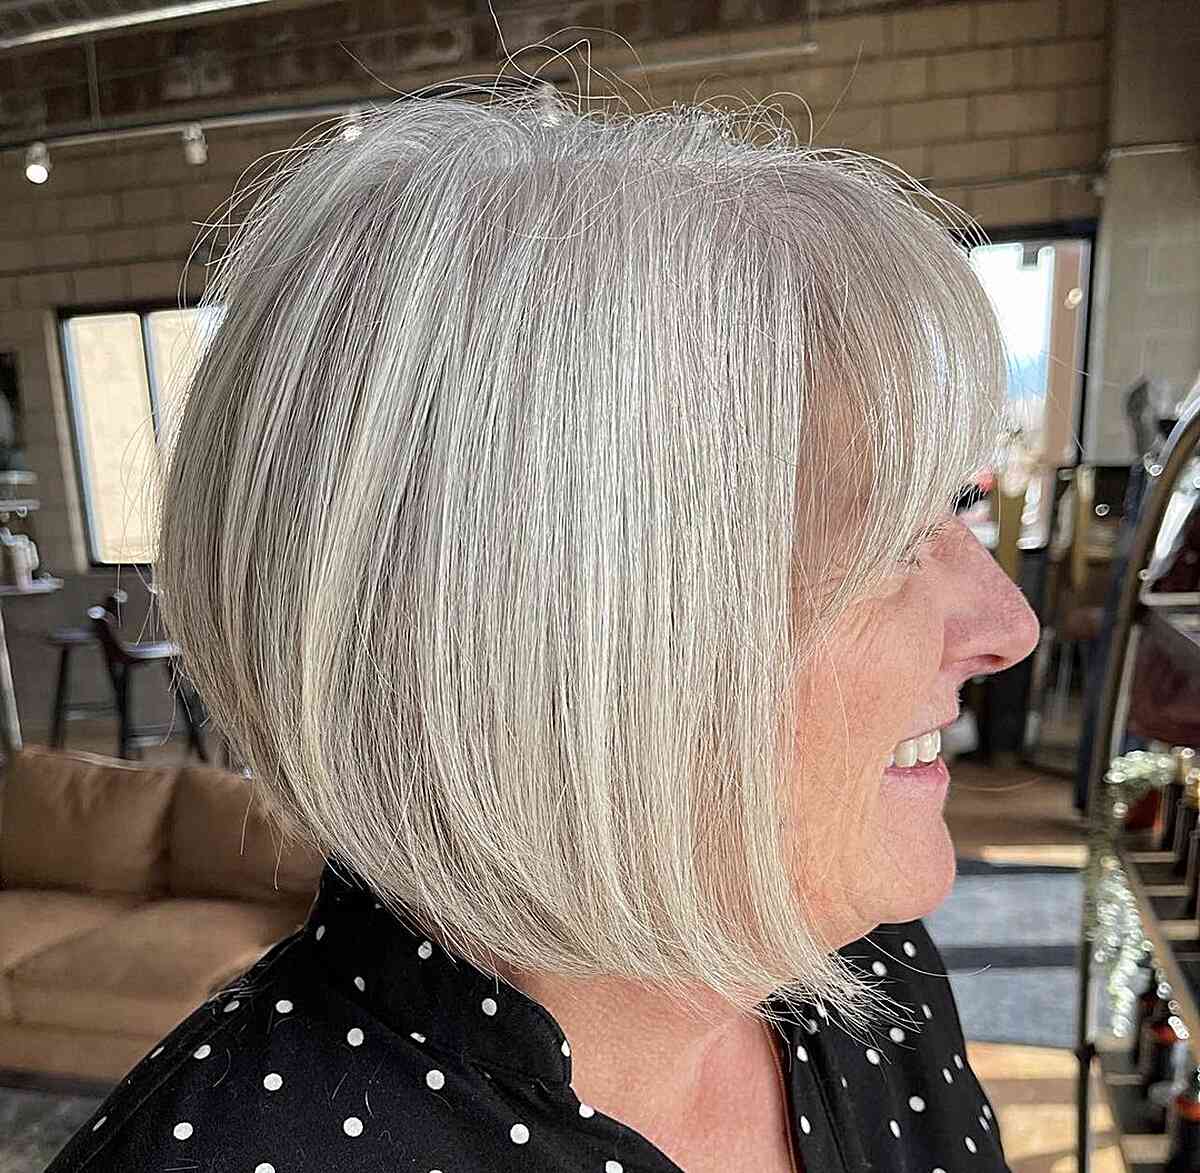 Chin-Length Silver Inverted Bob with Thin Bangs on Ladies Aged 60 and Up